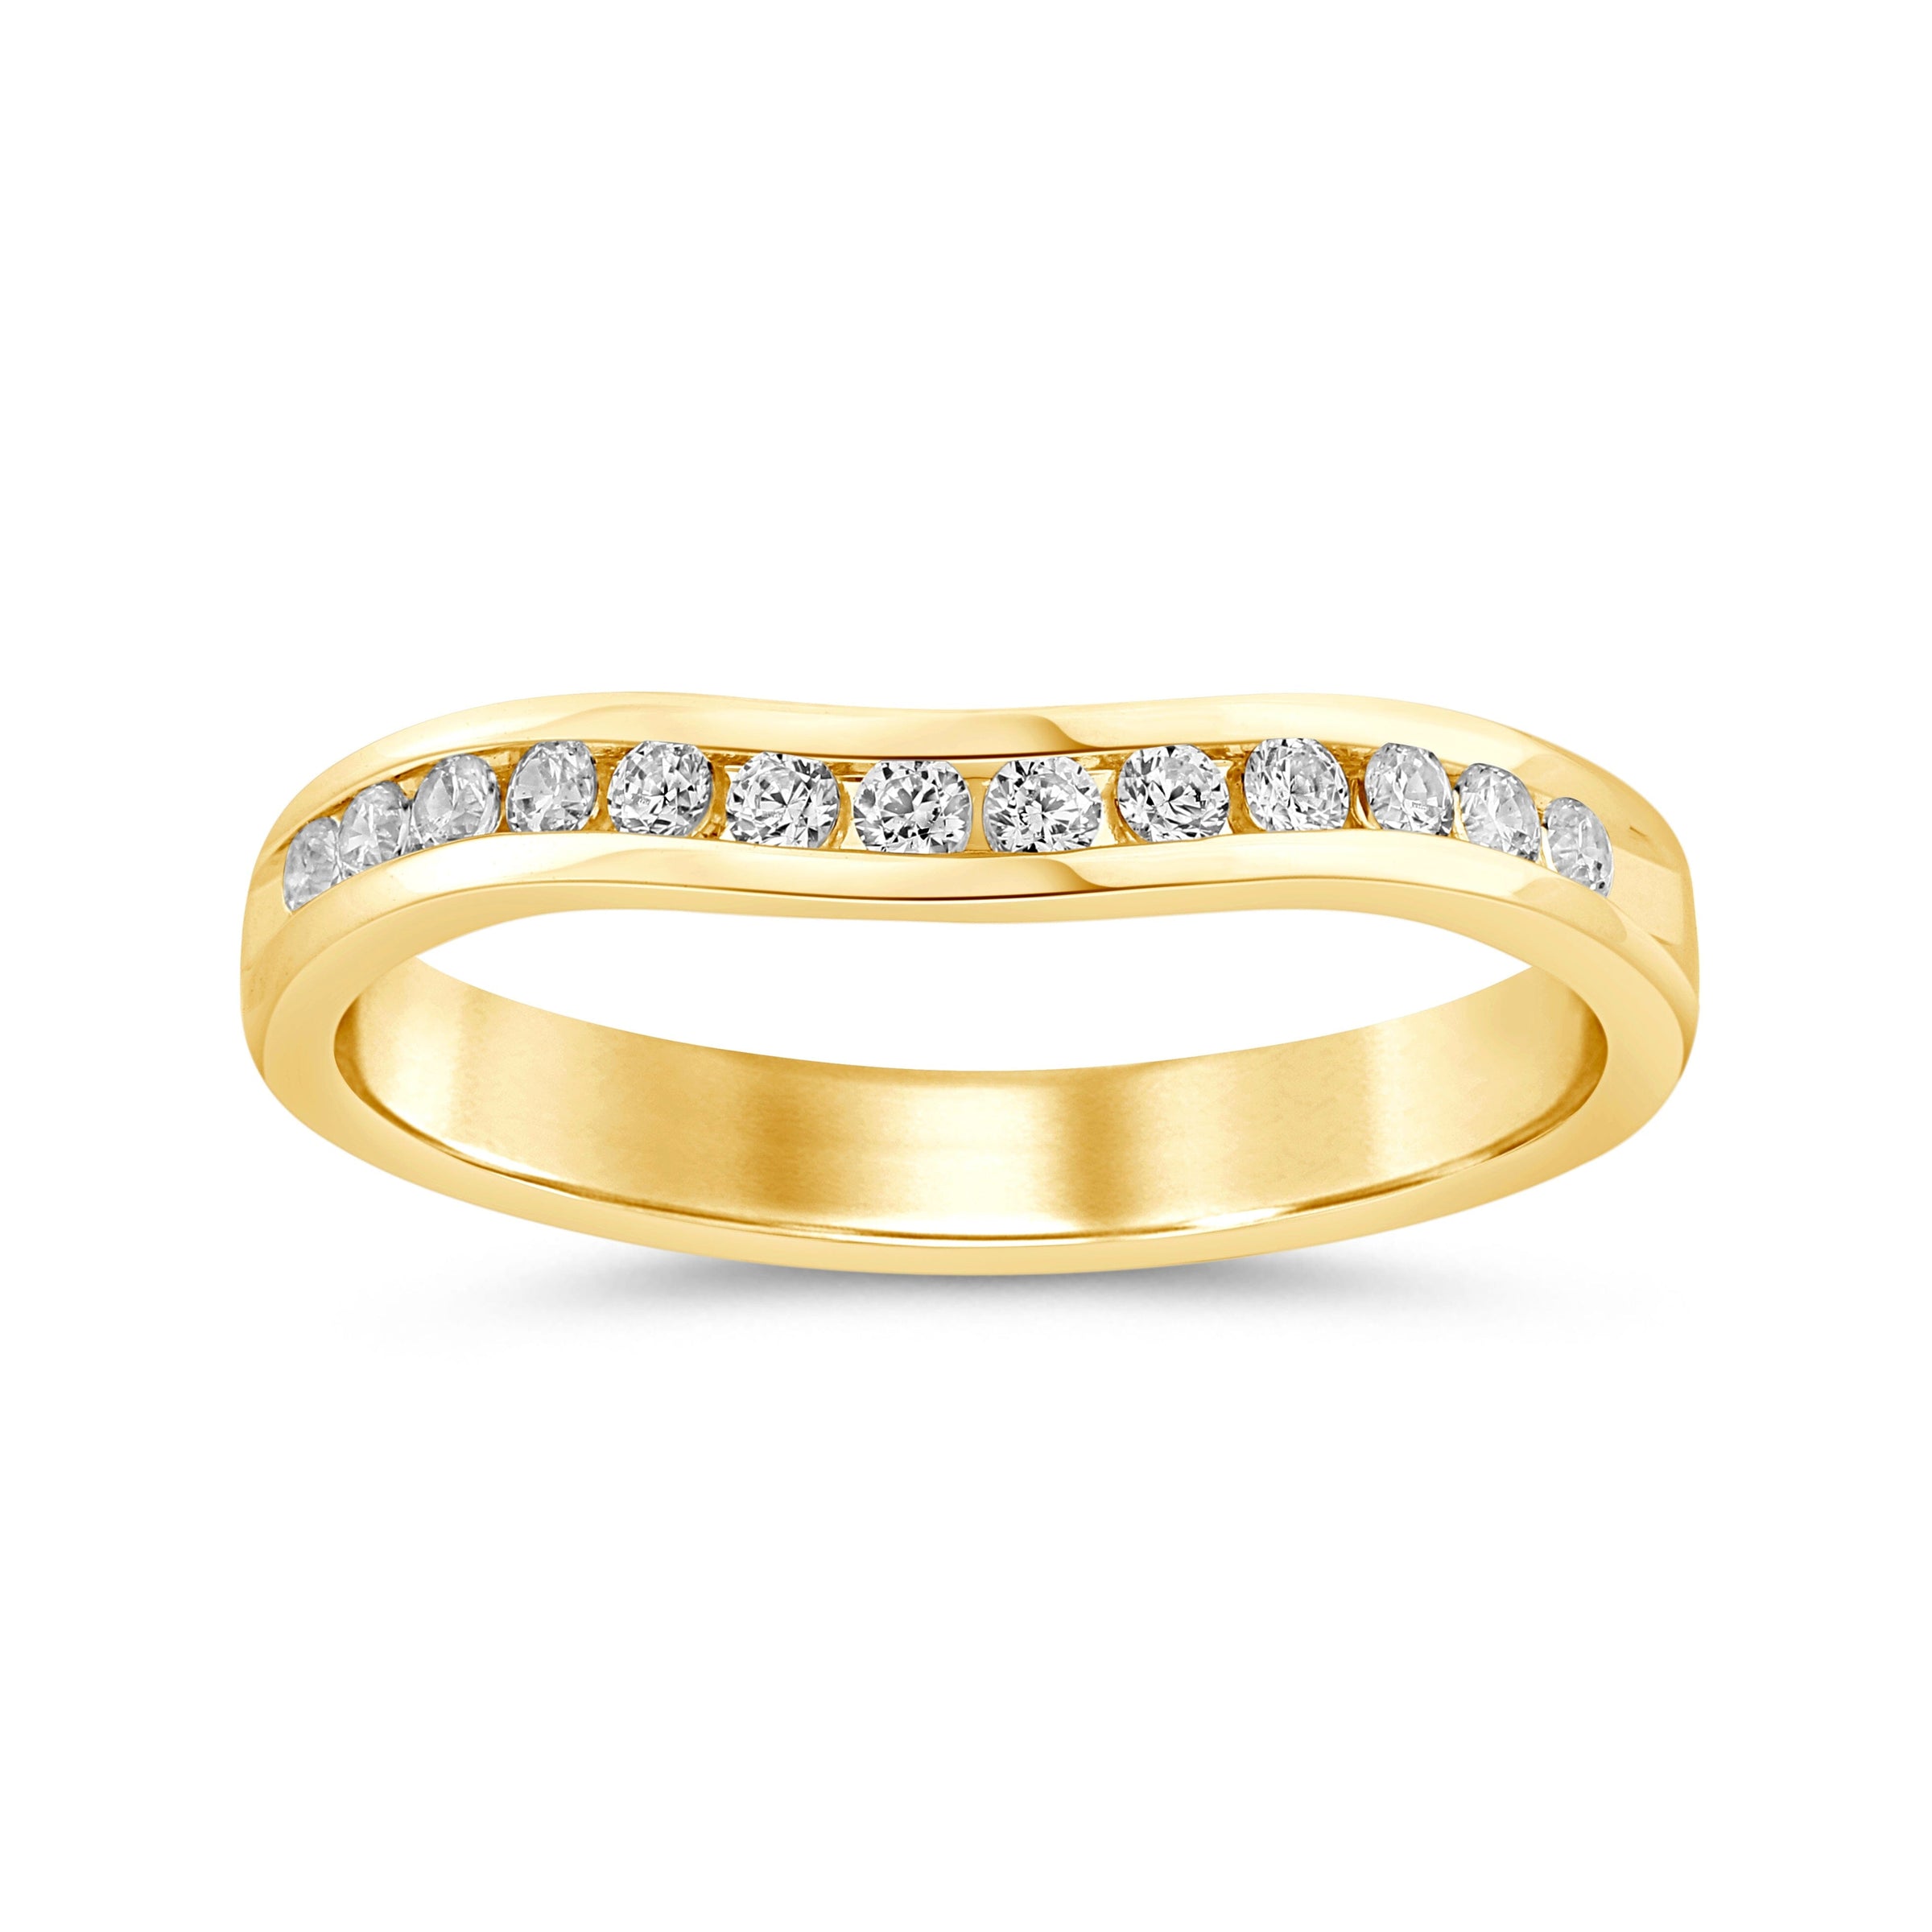 Brilliant Curved Eternity Ring with 1/4ct of Diamonds in 18ct Yellow Gold Rings Bevilles 